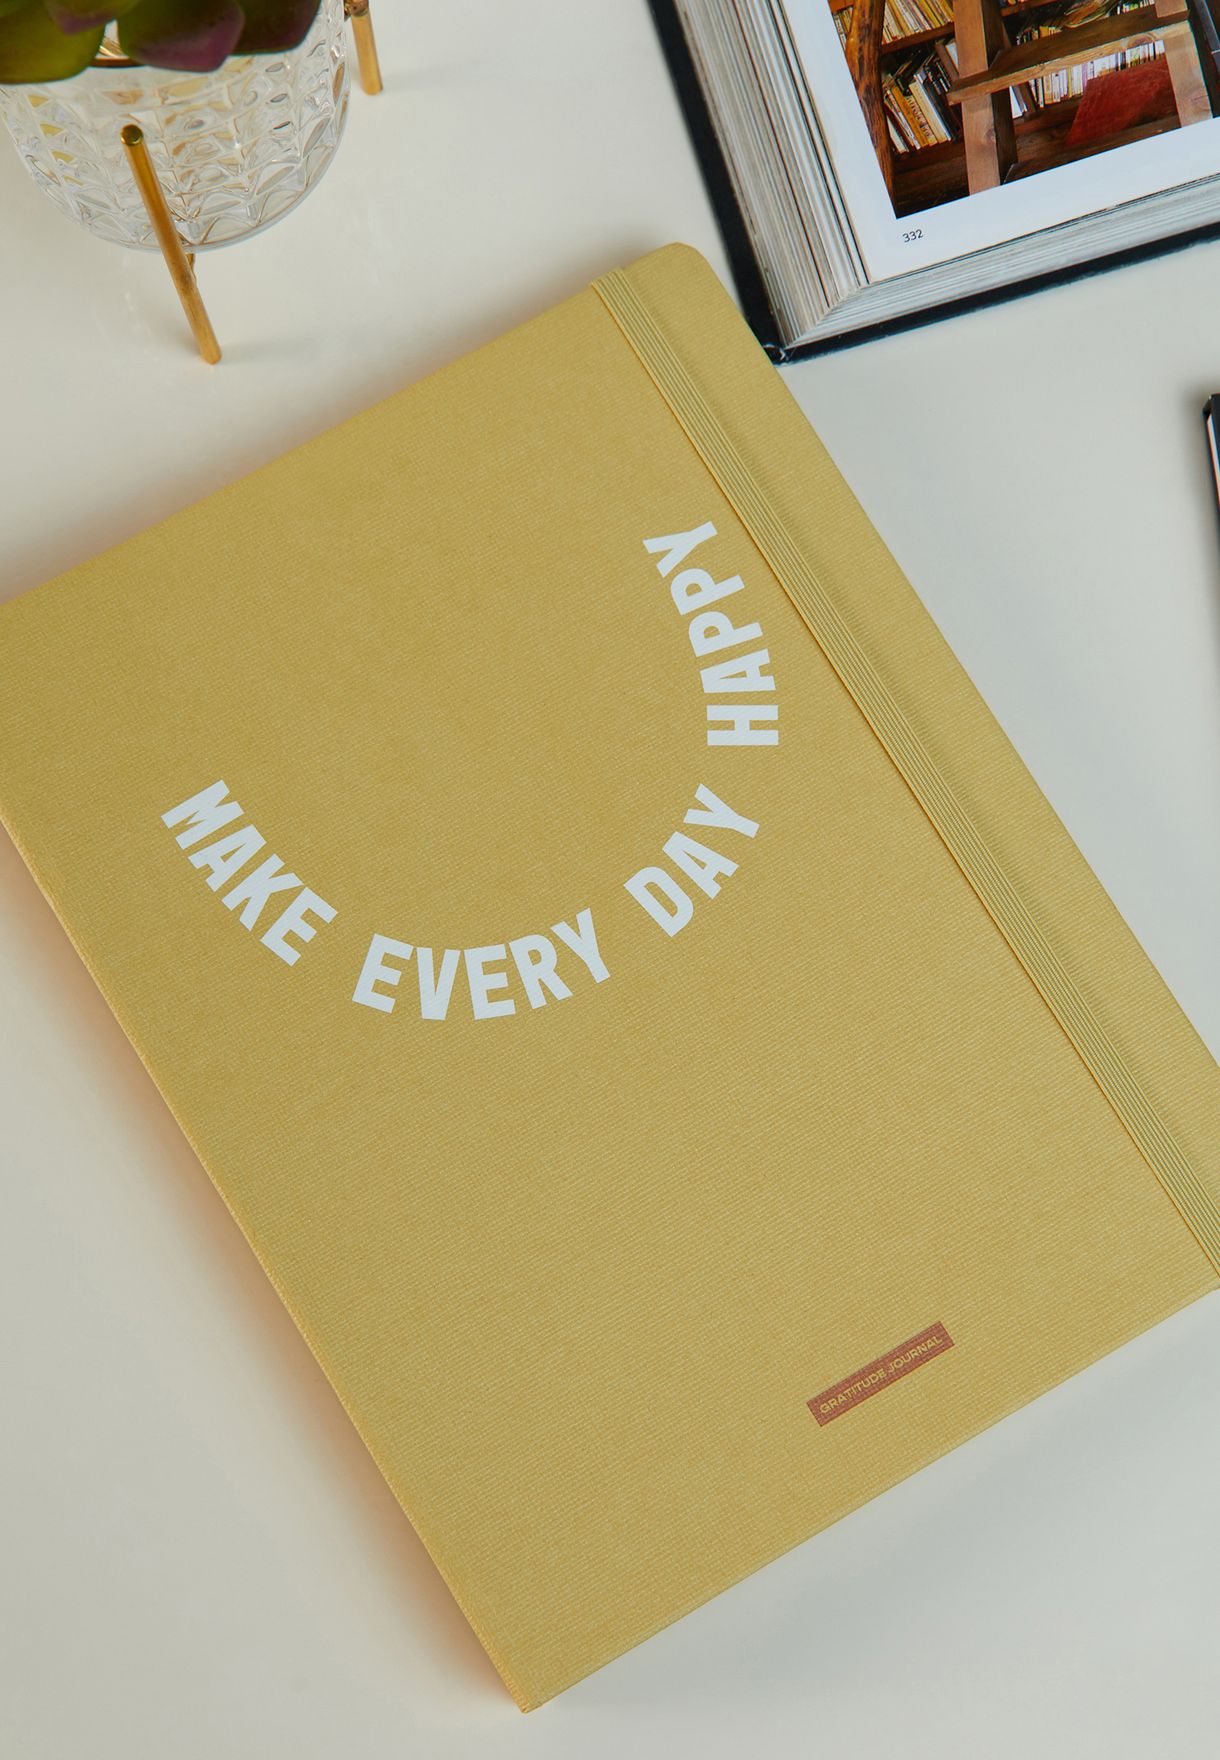 Make Every Day Happy Journal